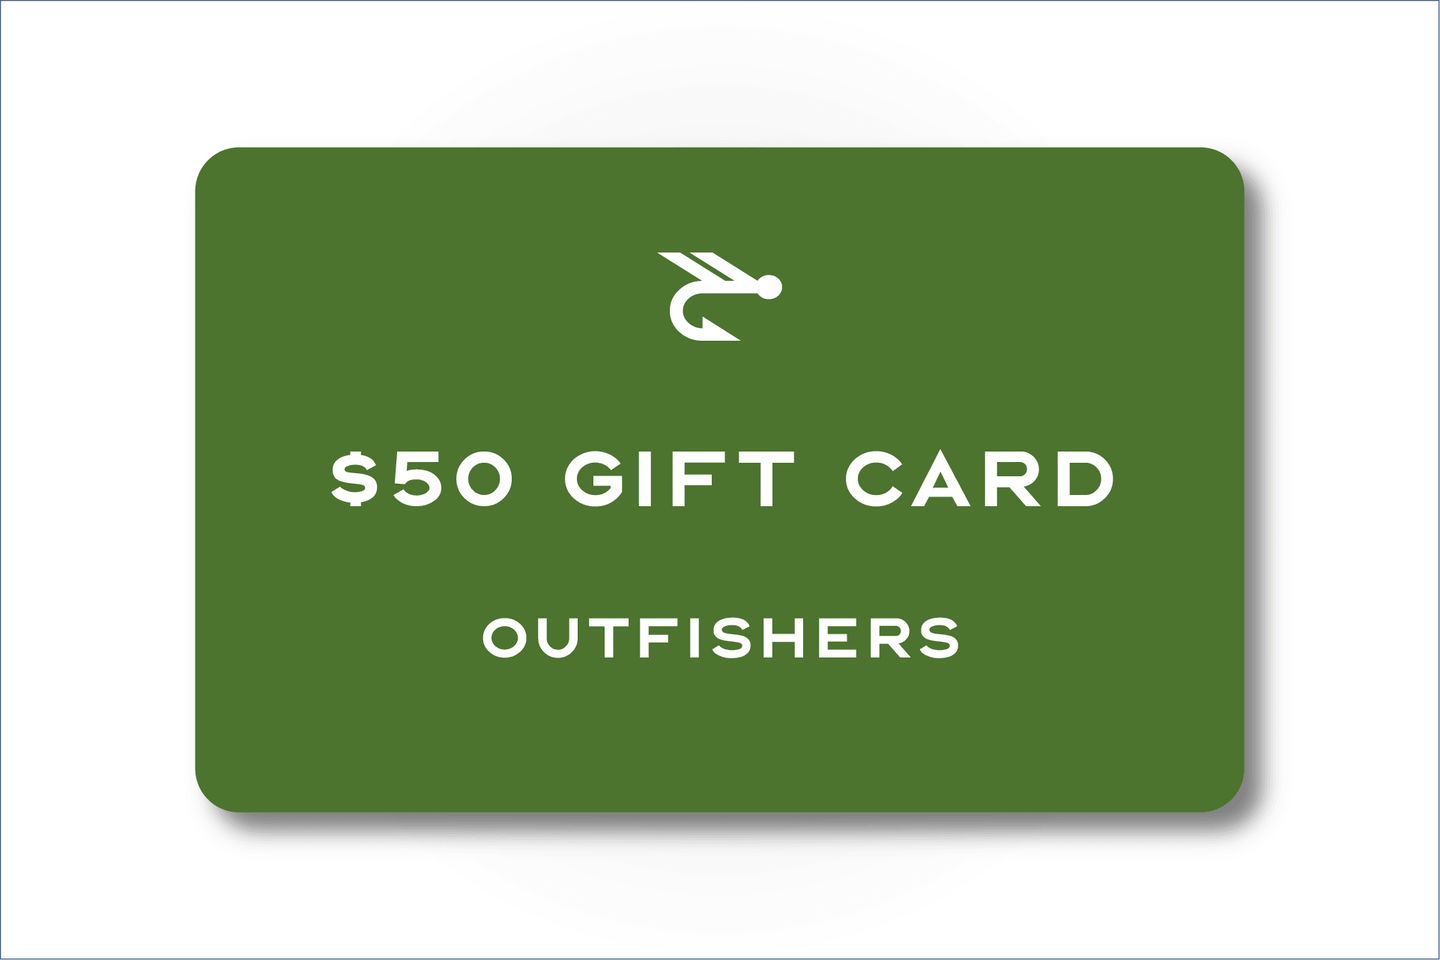 Outfishers Gift Card - Outfishers